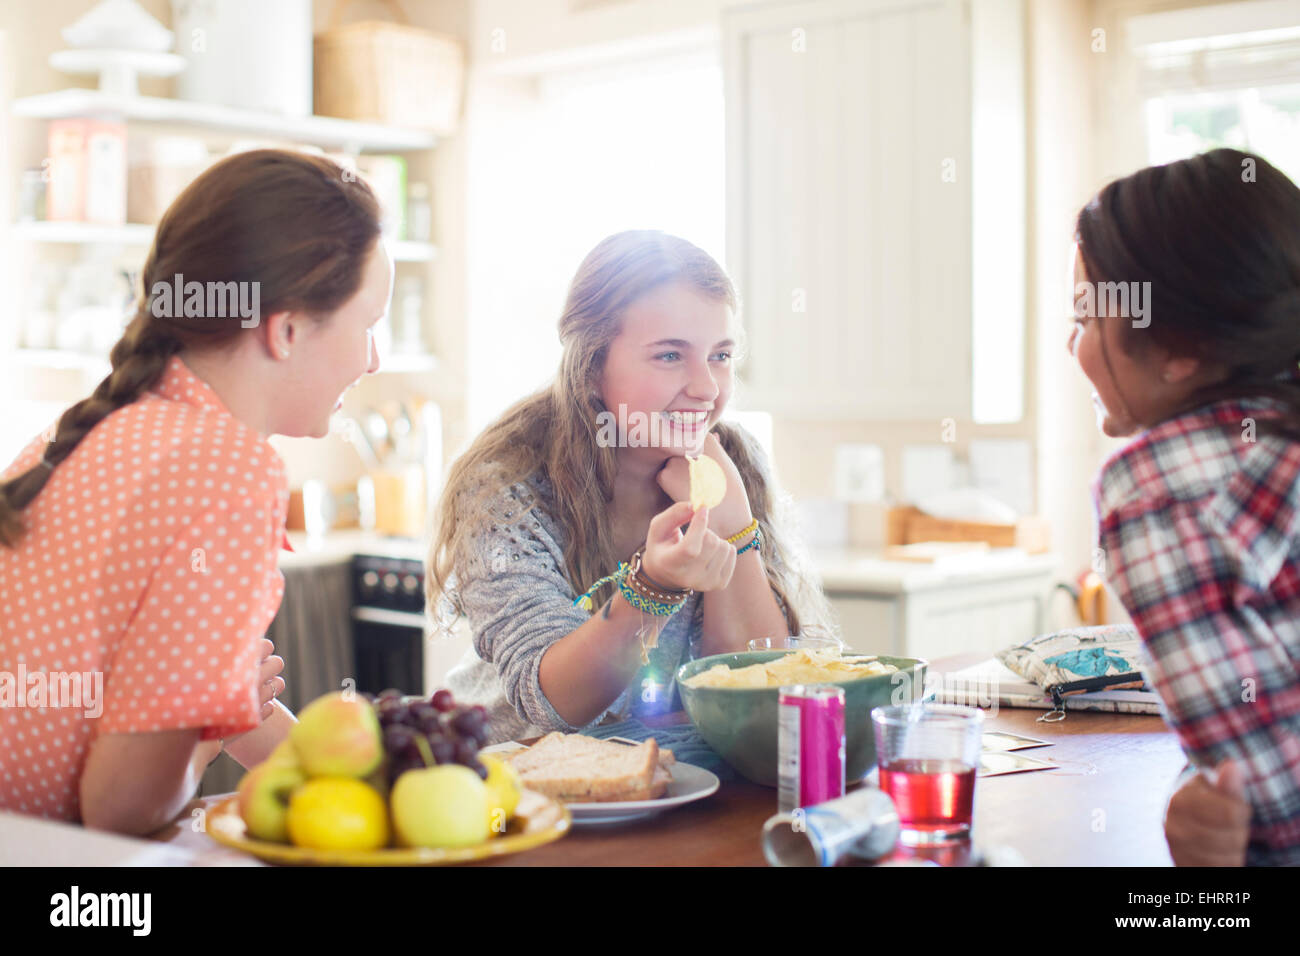 Three teenage girls talking at table in dining room Stock Photo